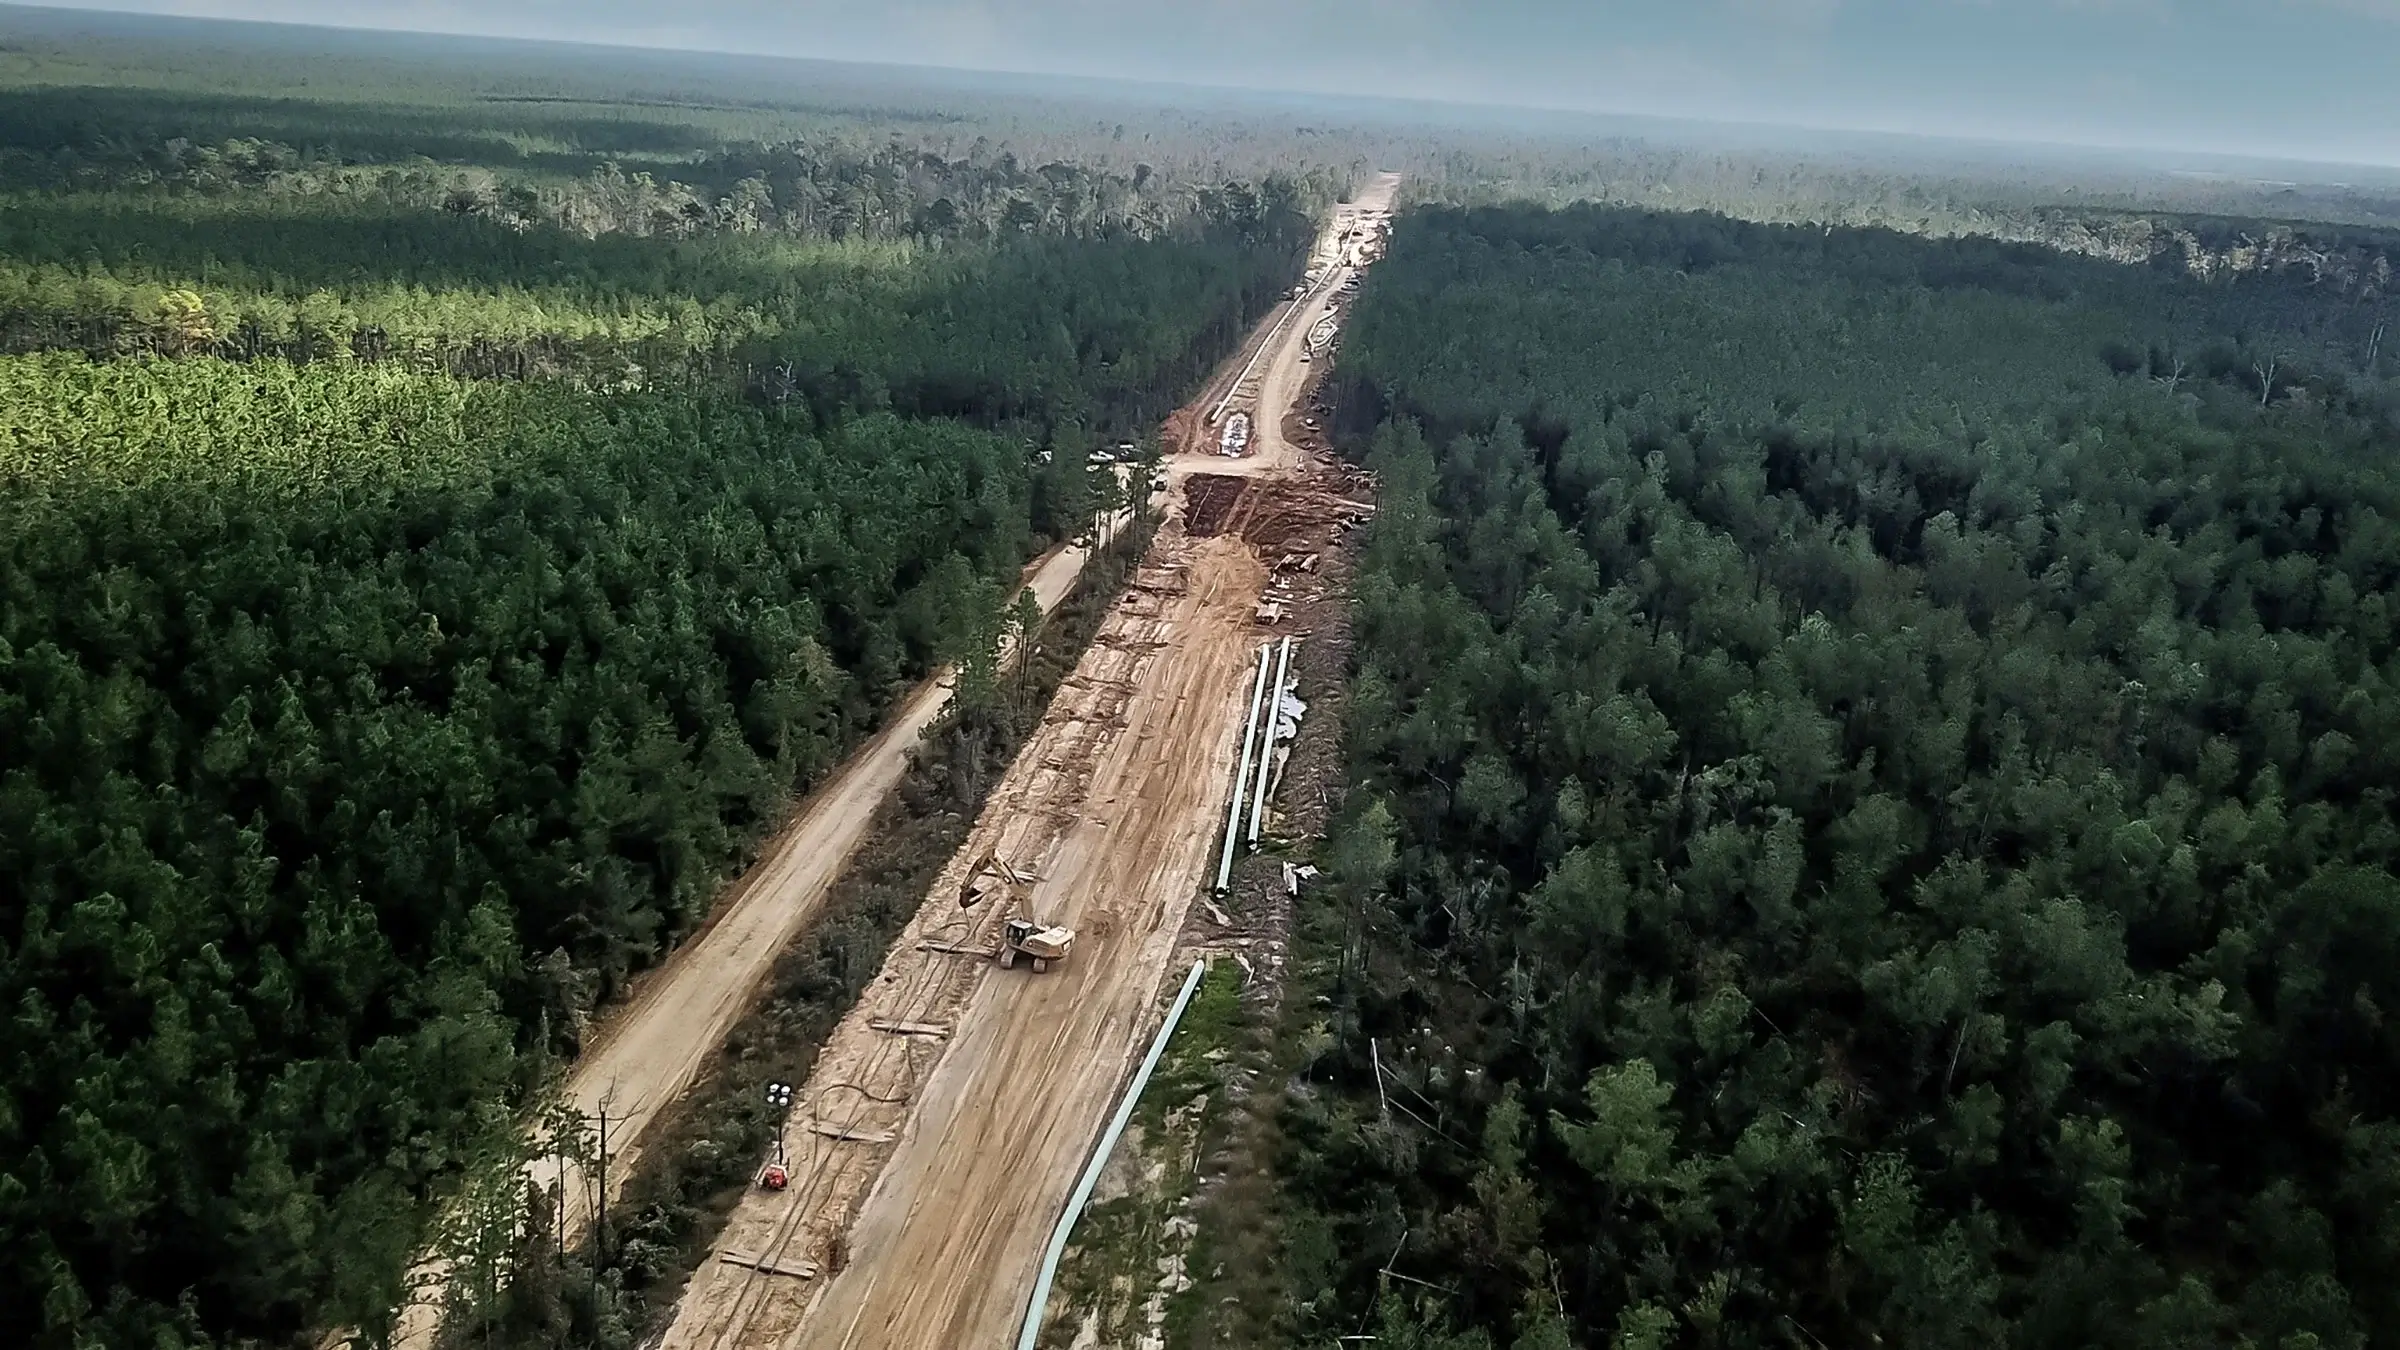 A large scale pipeline project spans across a densely forested area.